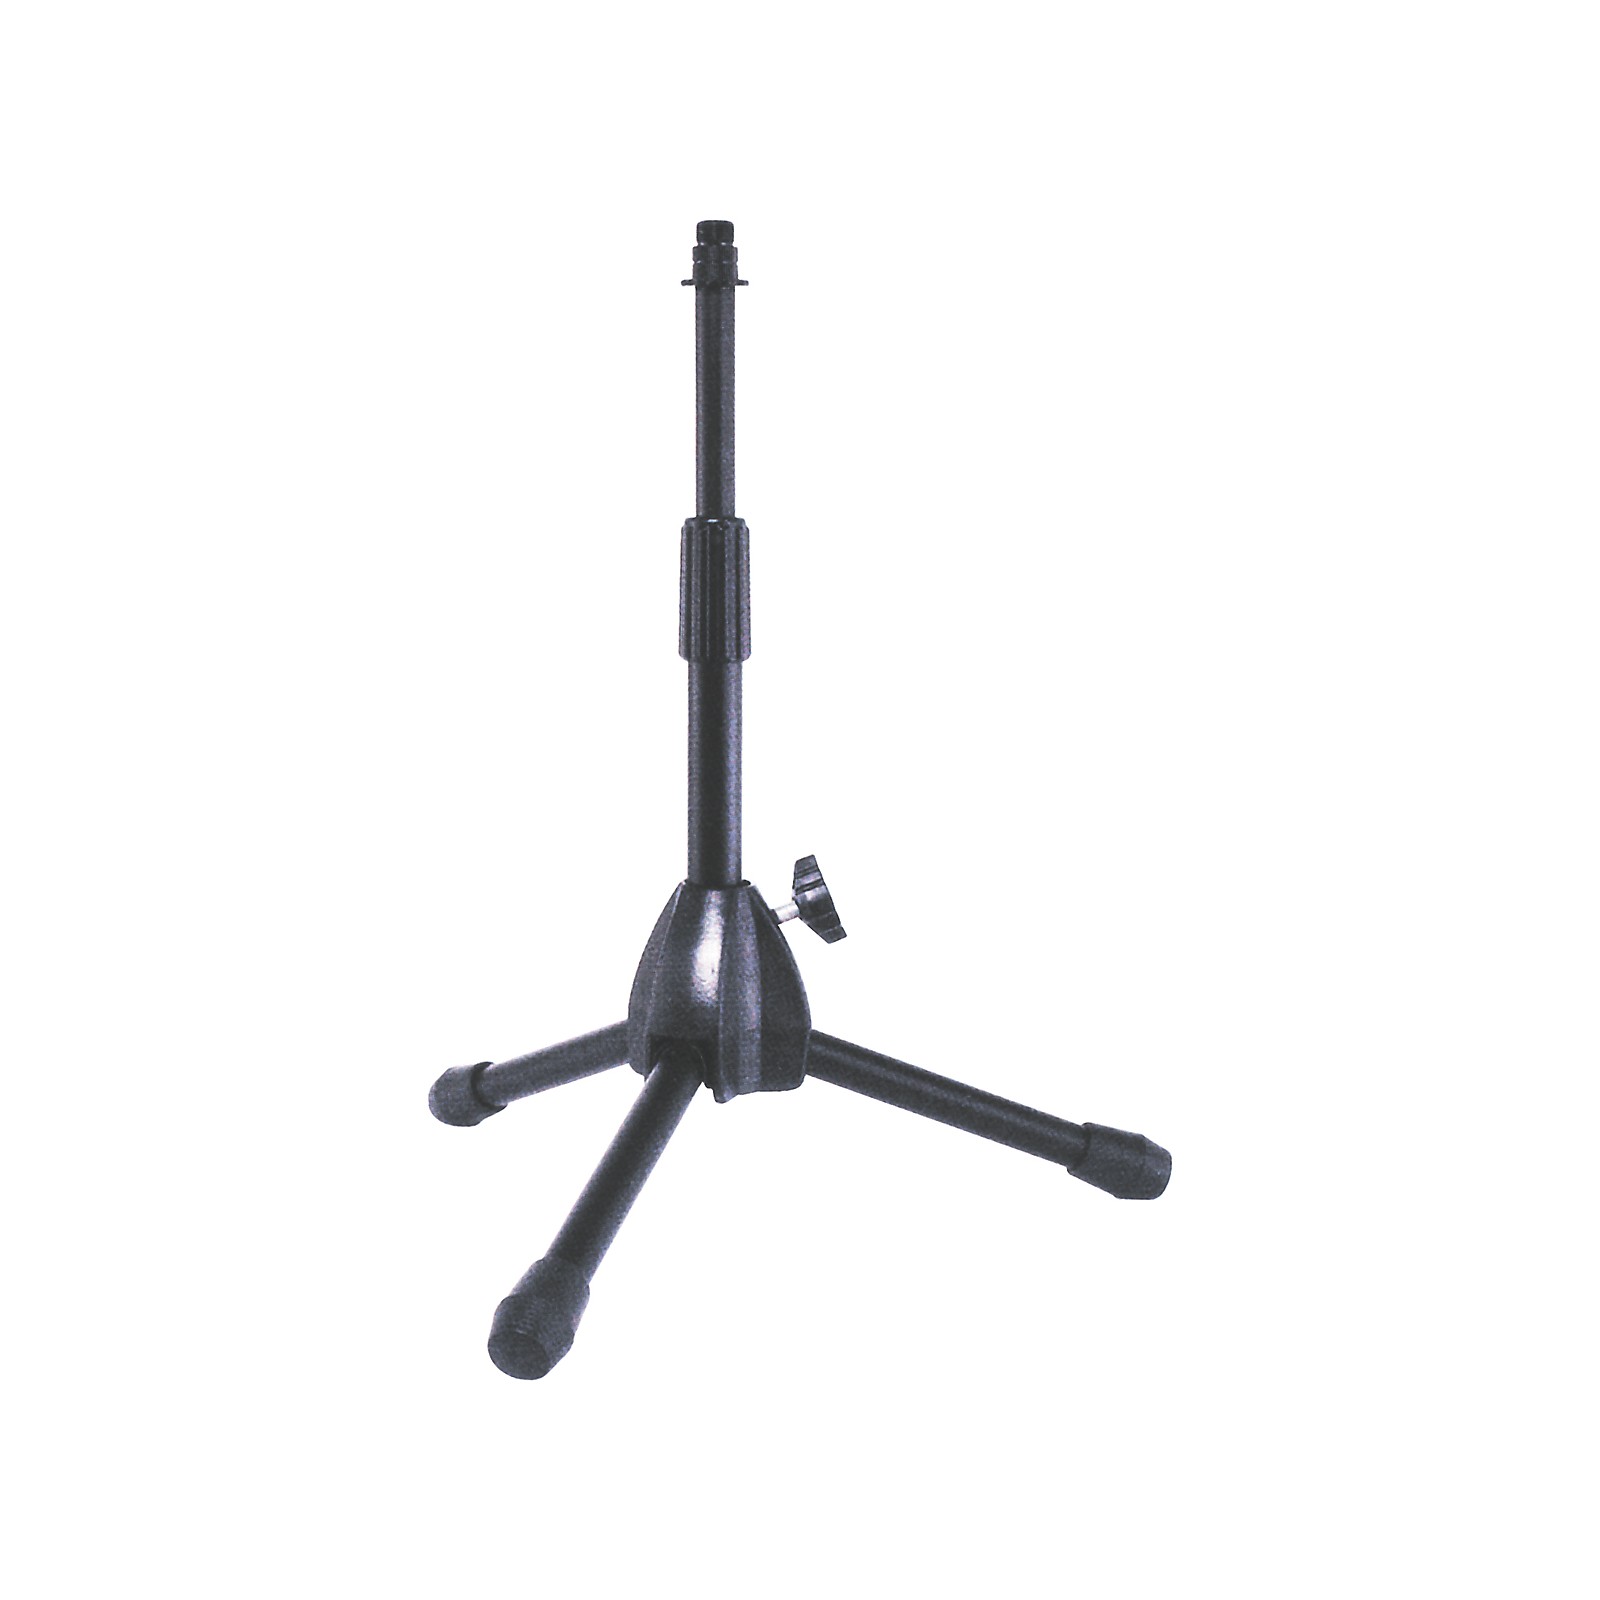 Low profile mic stand